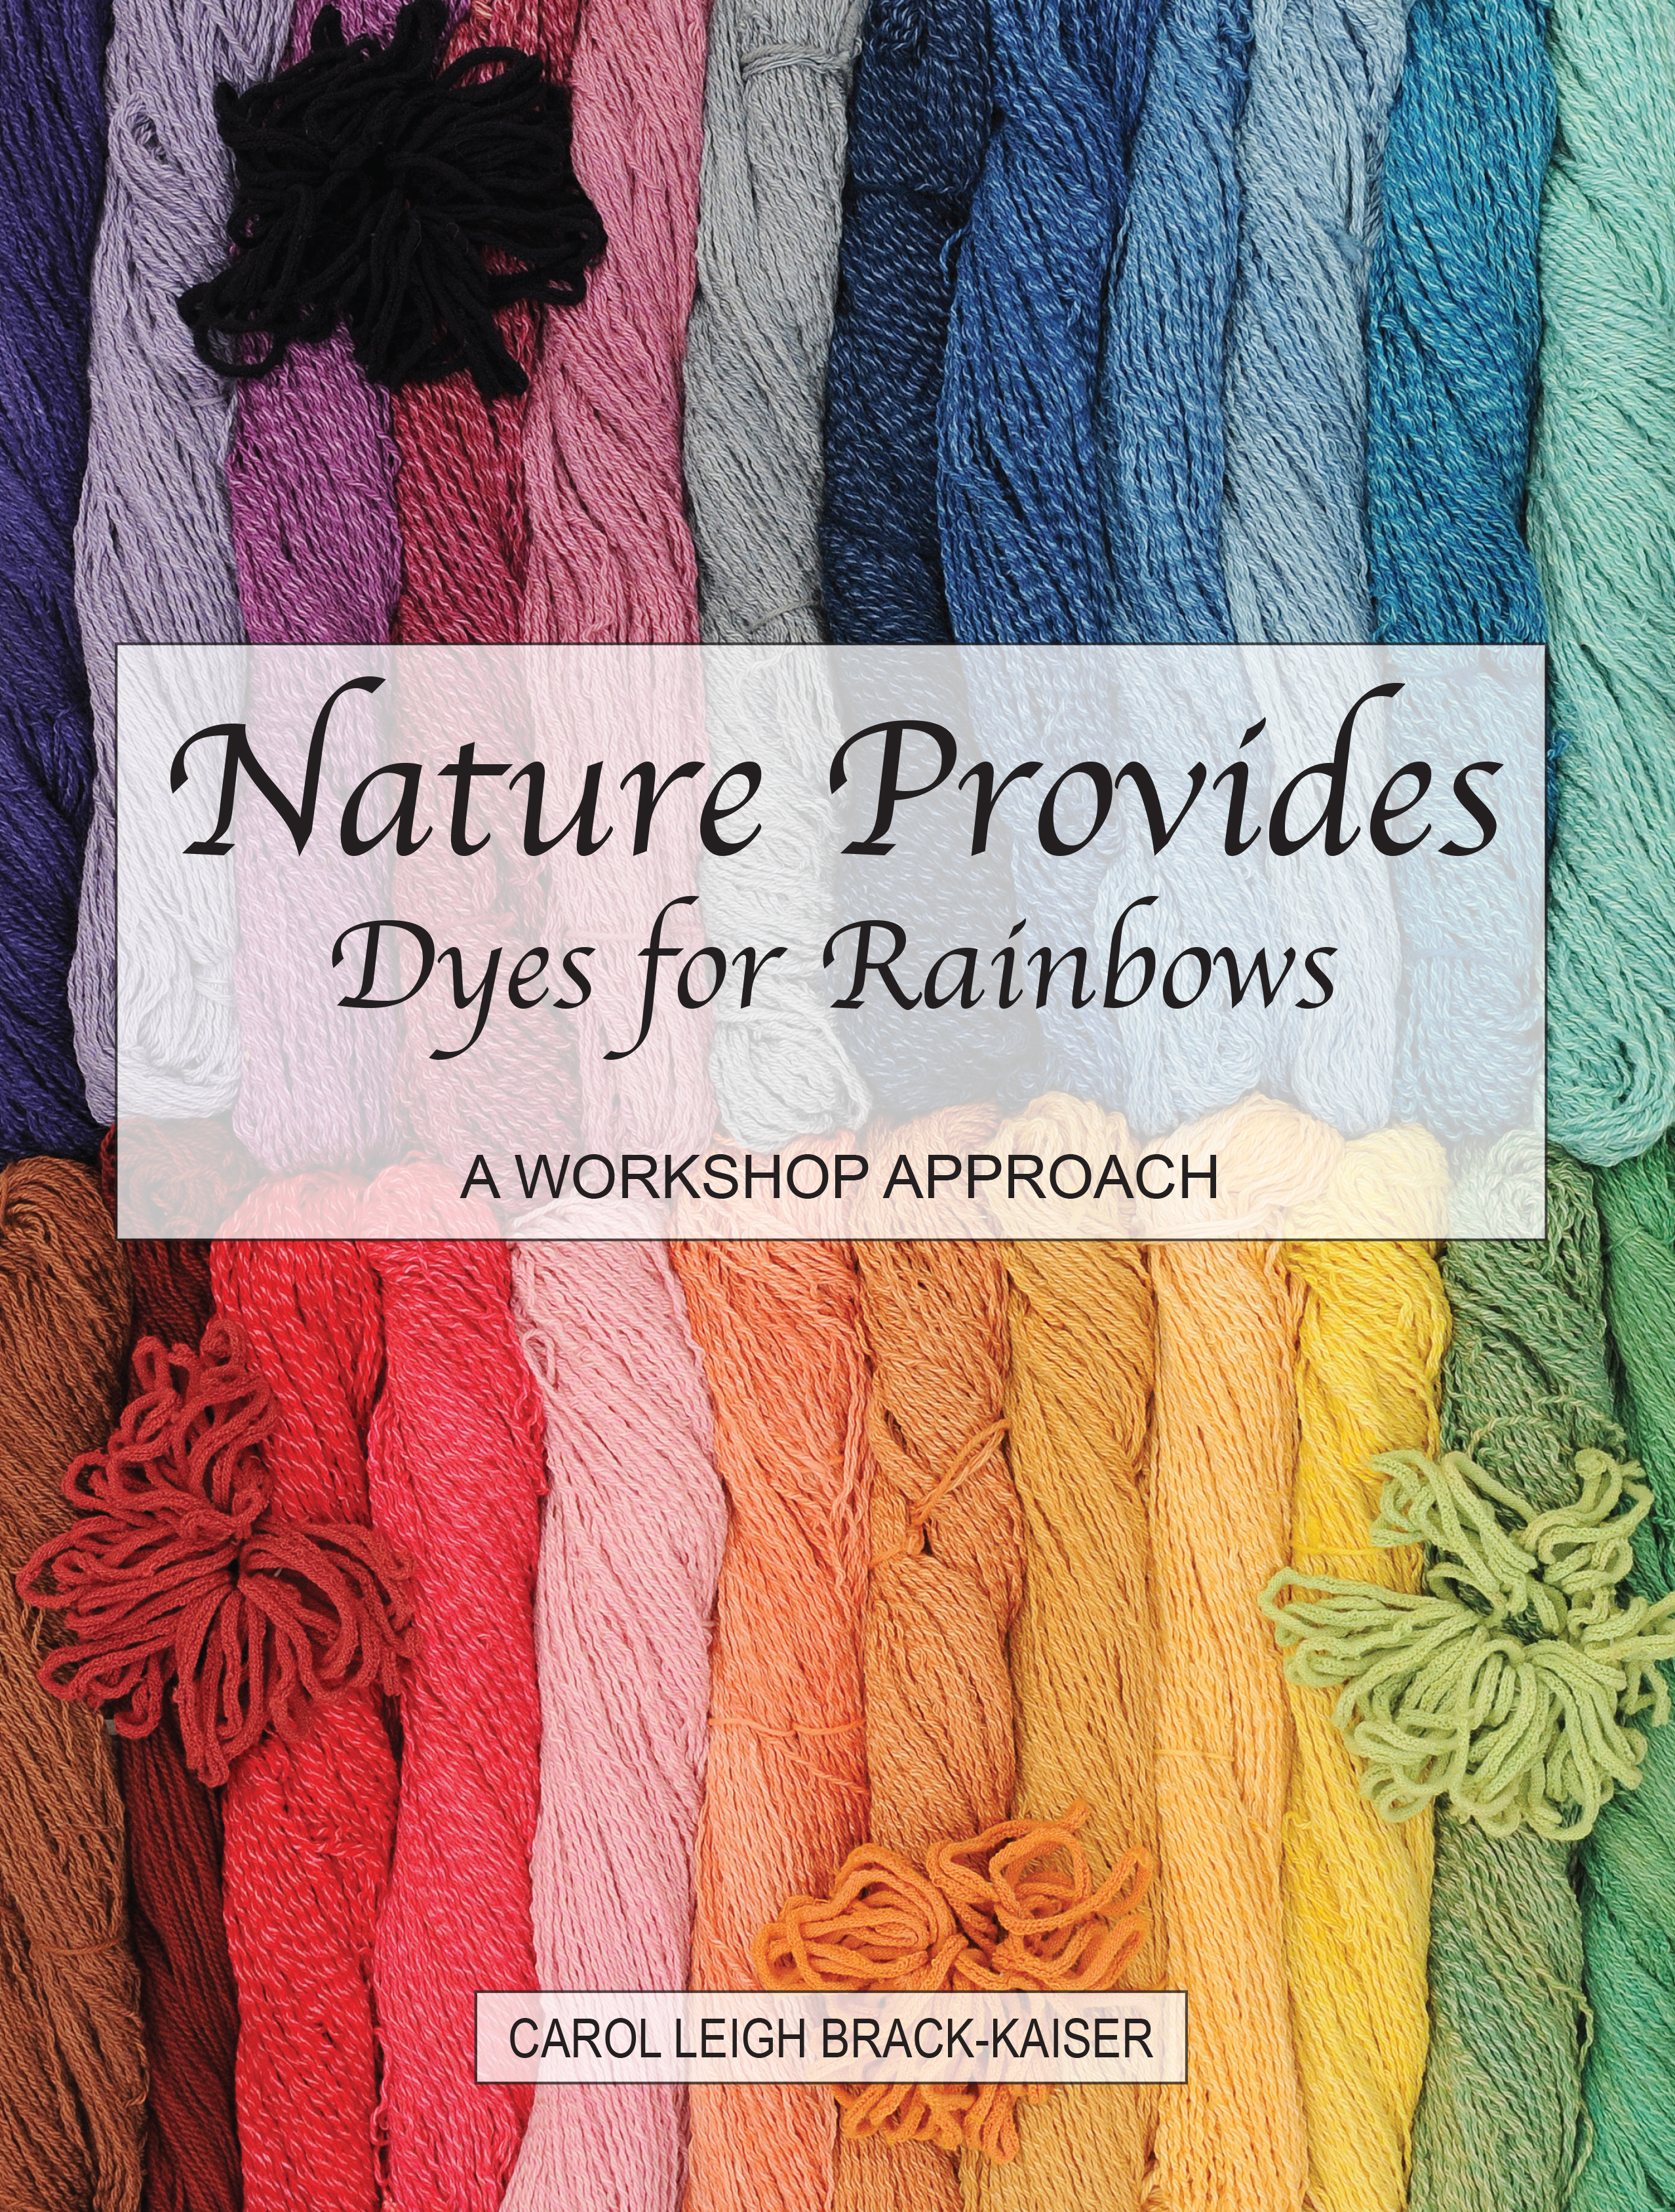 Nature Provides Dyes for Rainbows, A Workshop Approach